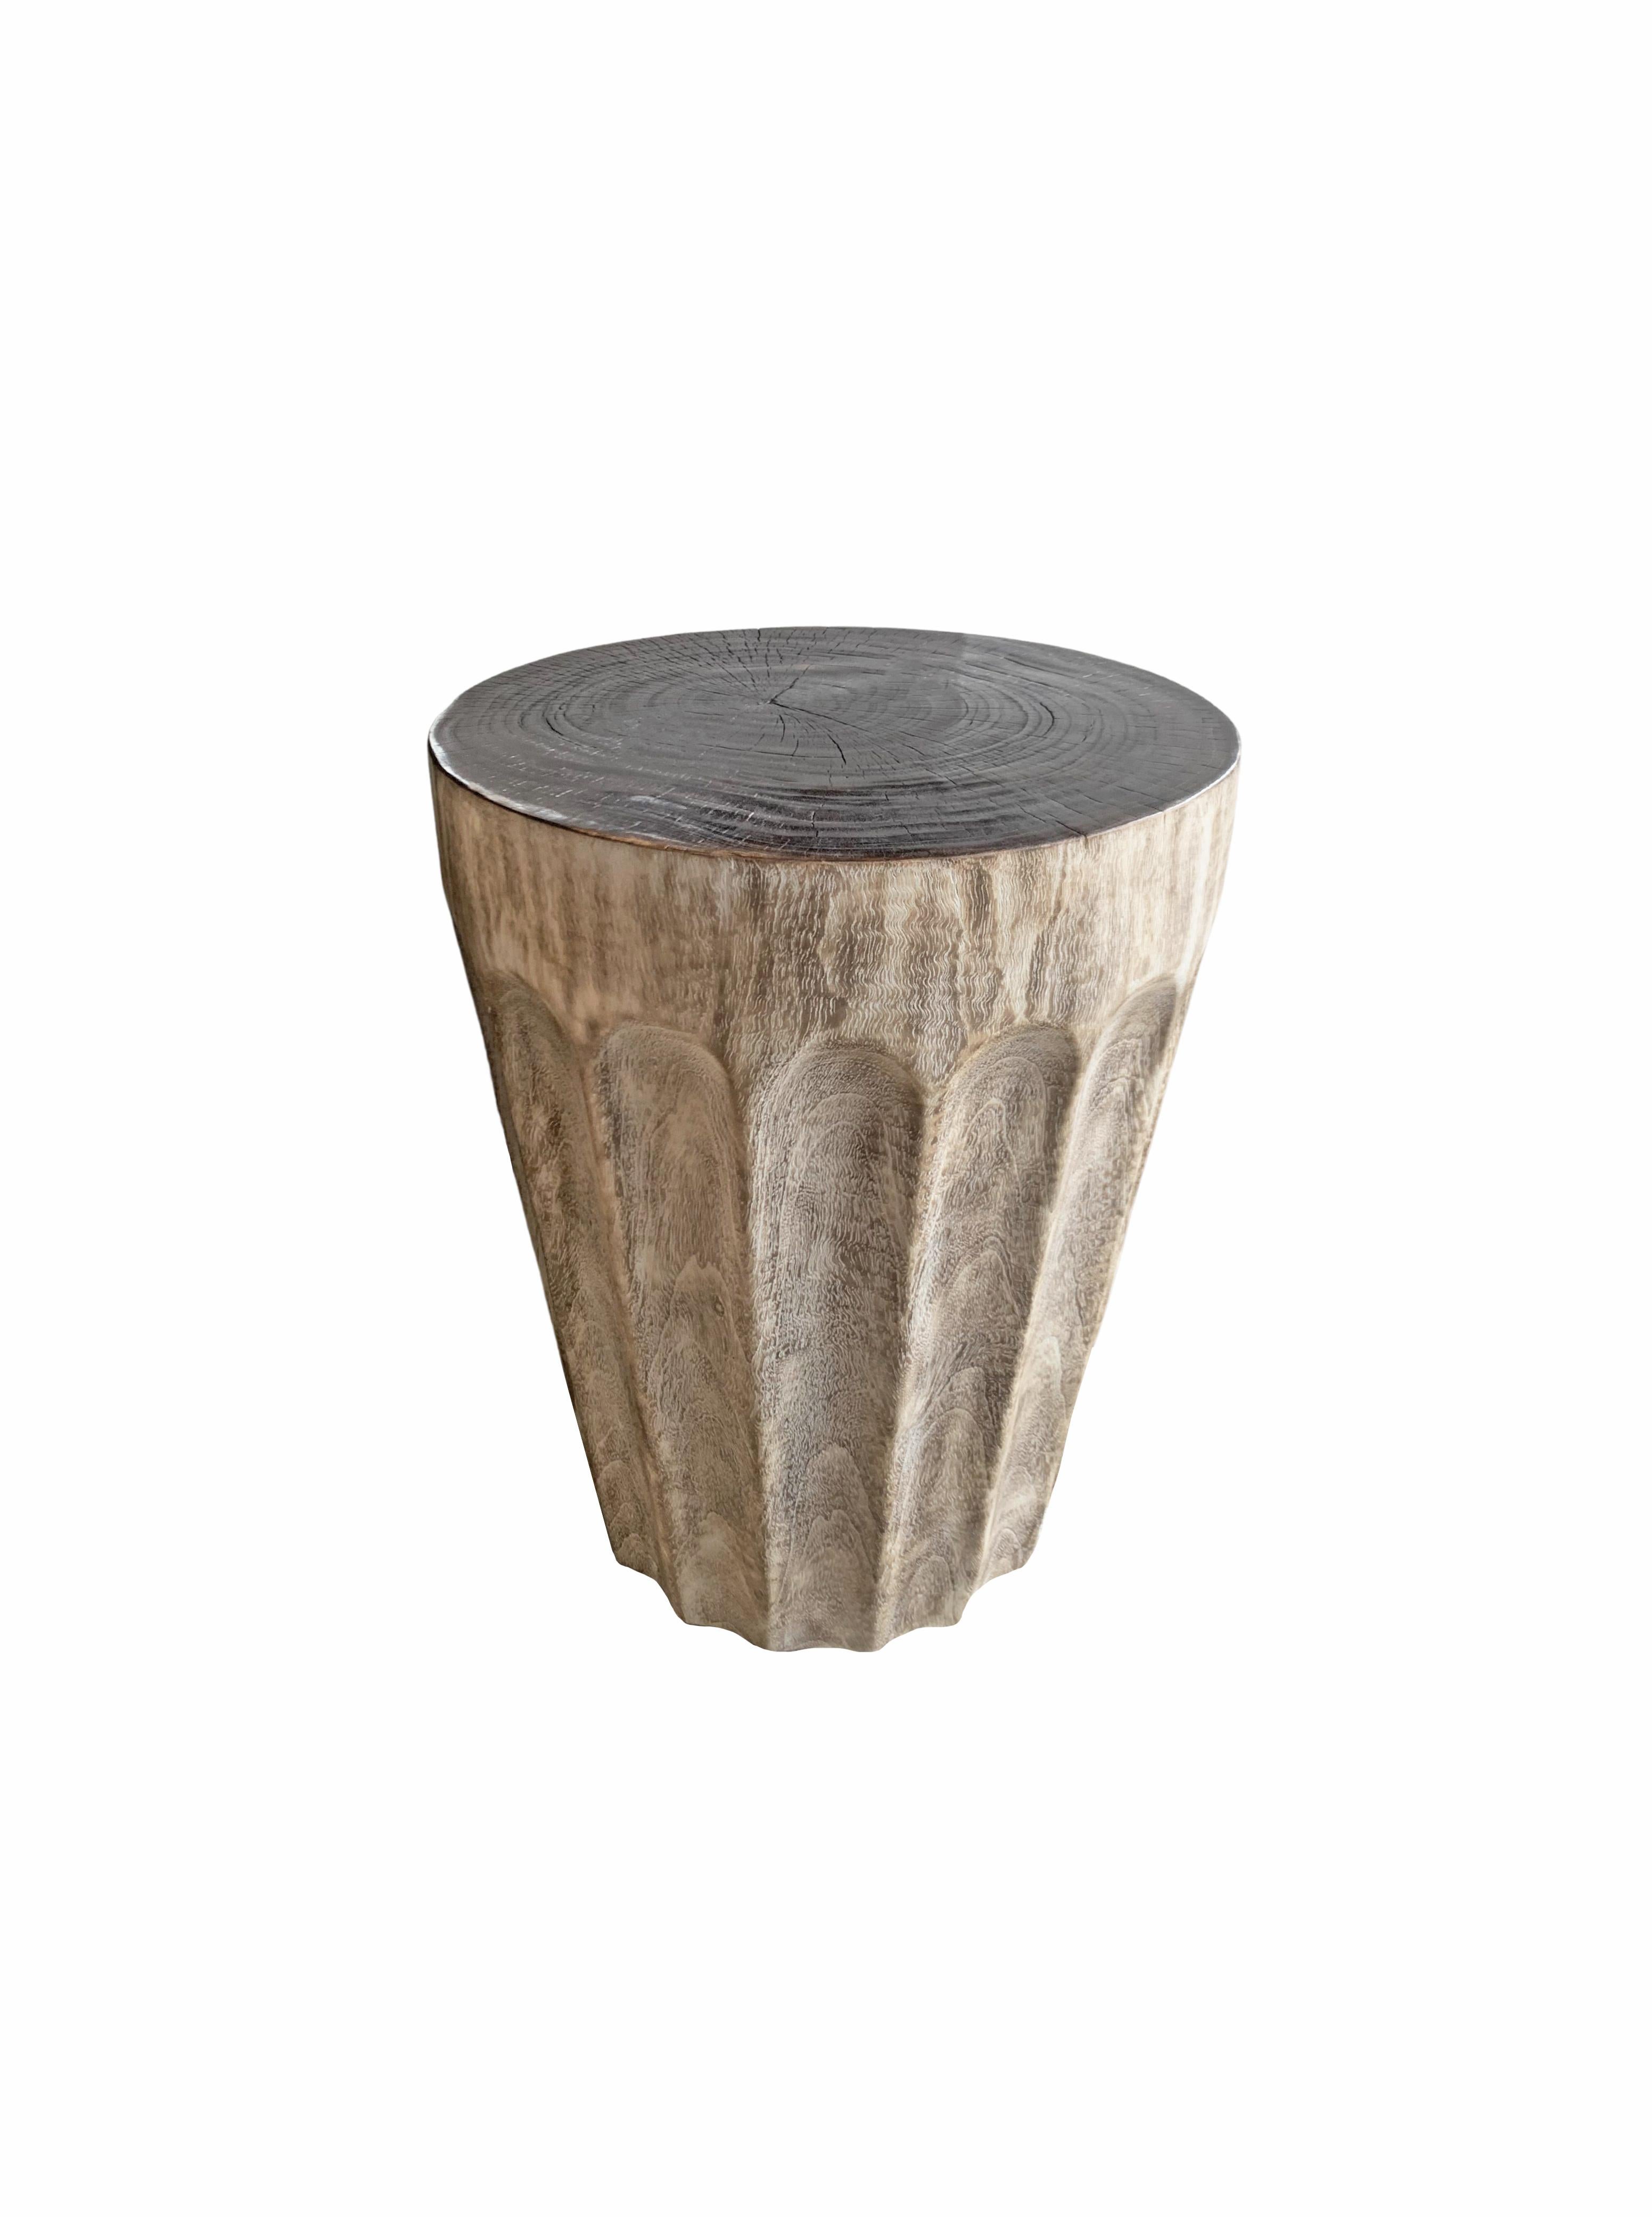 This wonderfully sculptural round side table features a ribbed pattern along its sides. It's narrow slender shape and mix of curves adds to its charm. The table's neutral pigment makes it perfect for any space. A uniquely sculptural and versatile